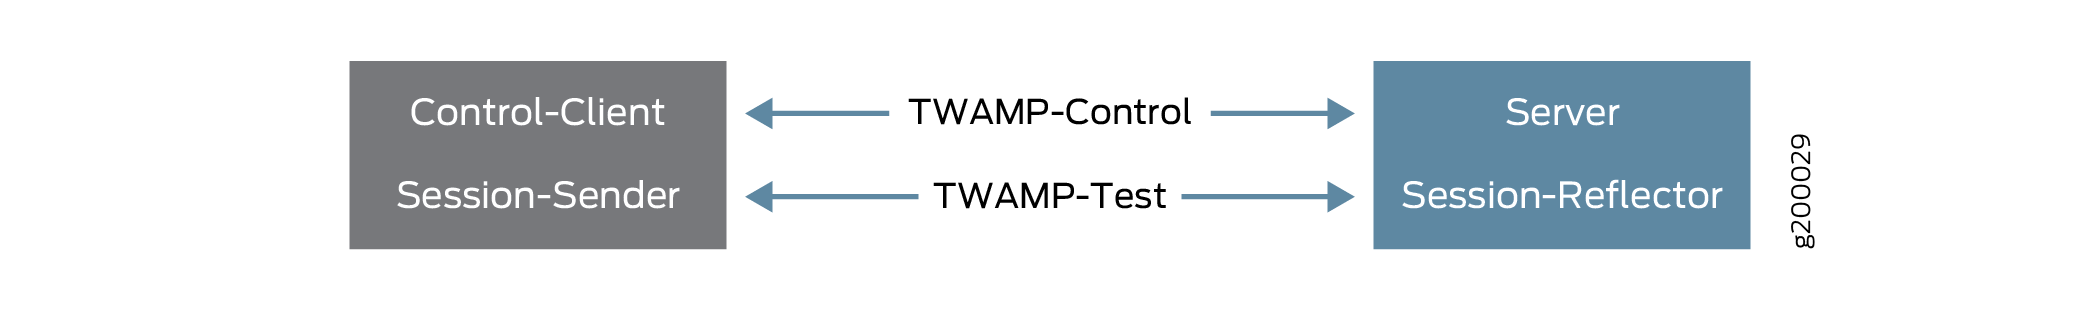 The Elements of TWAMP Implemented as Client and Server